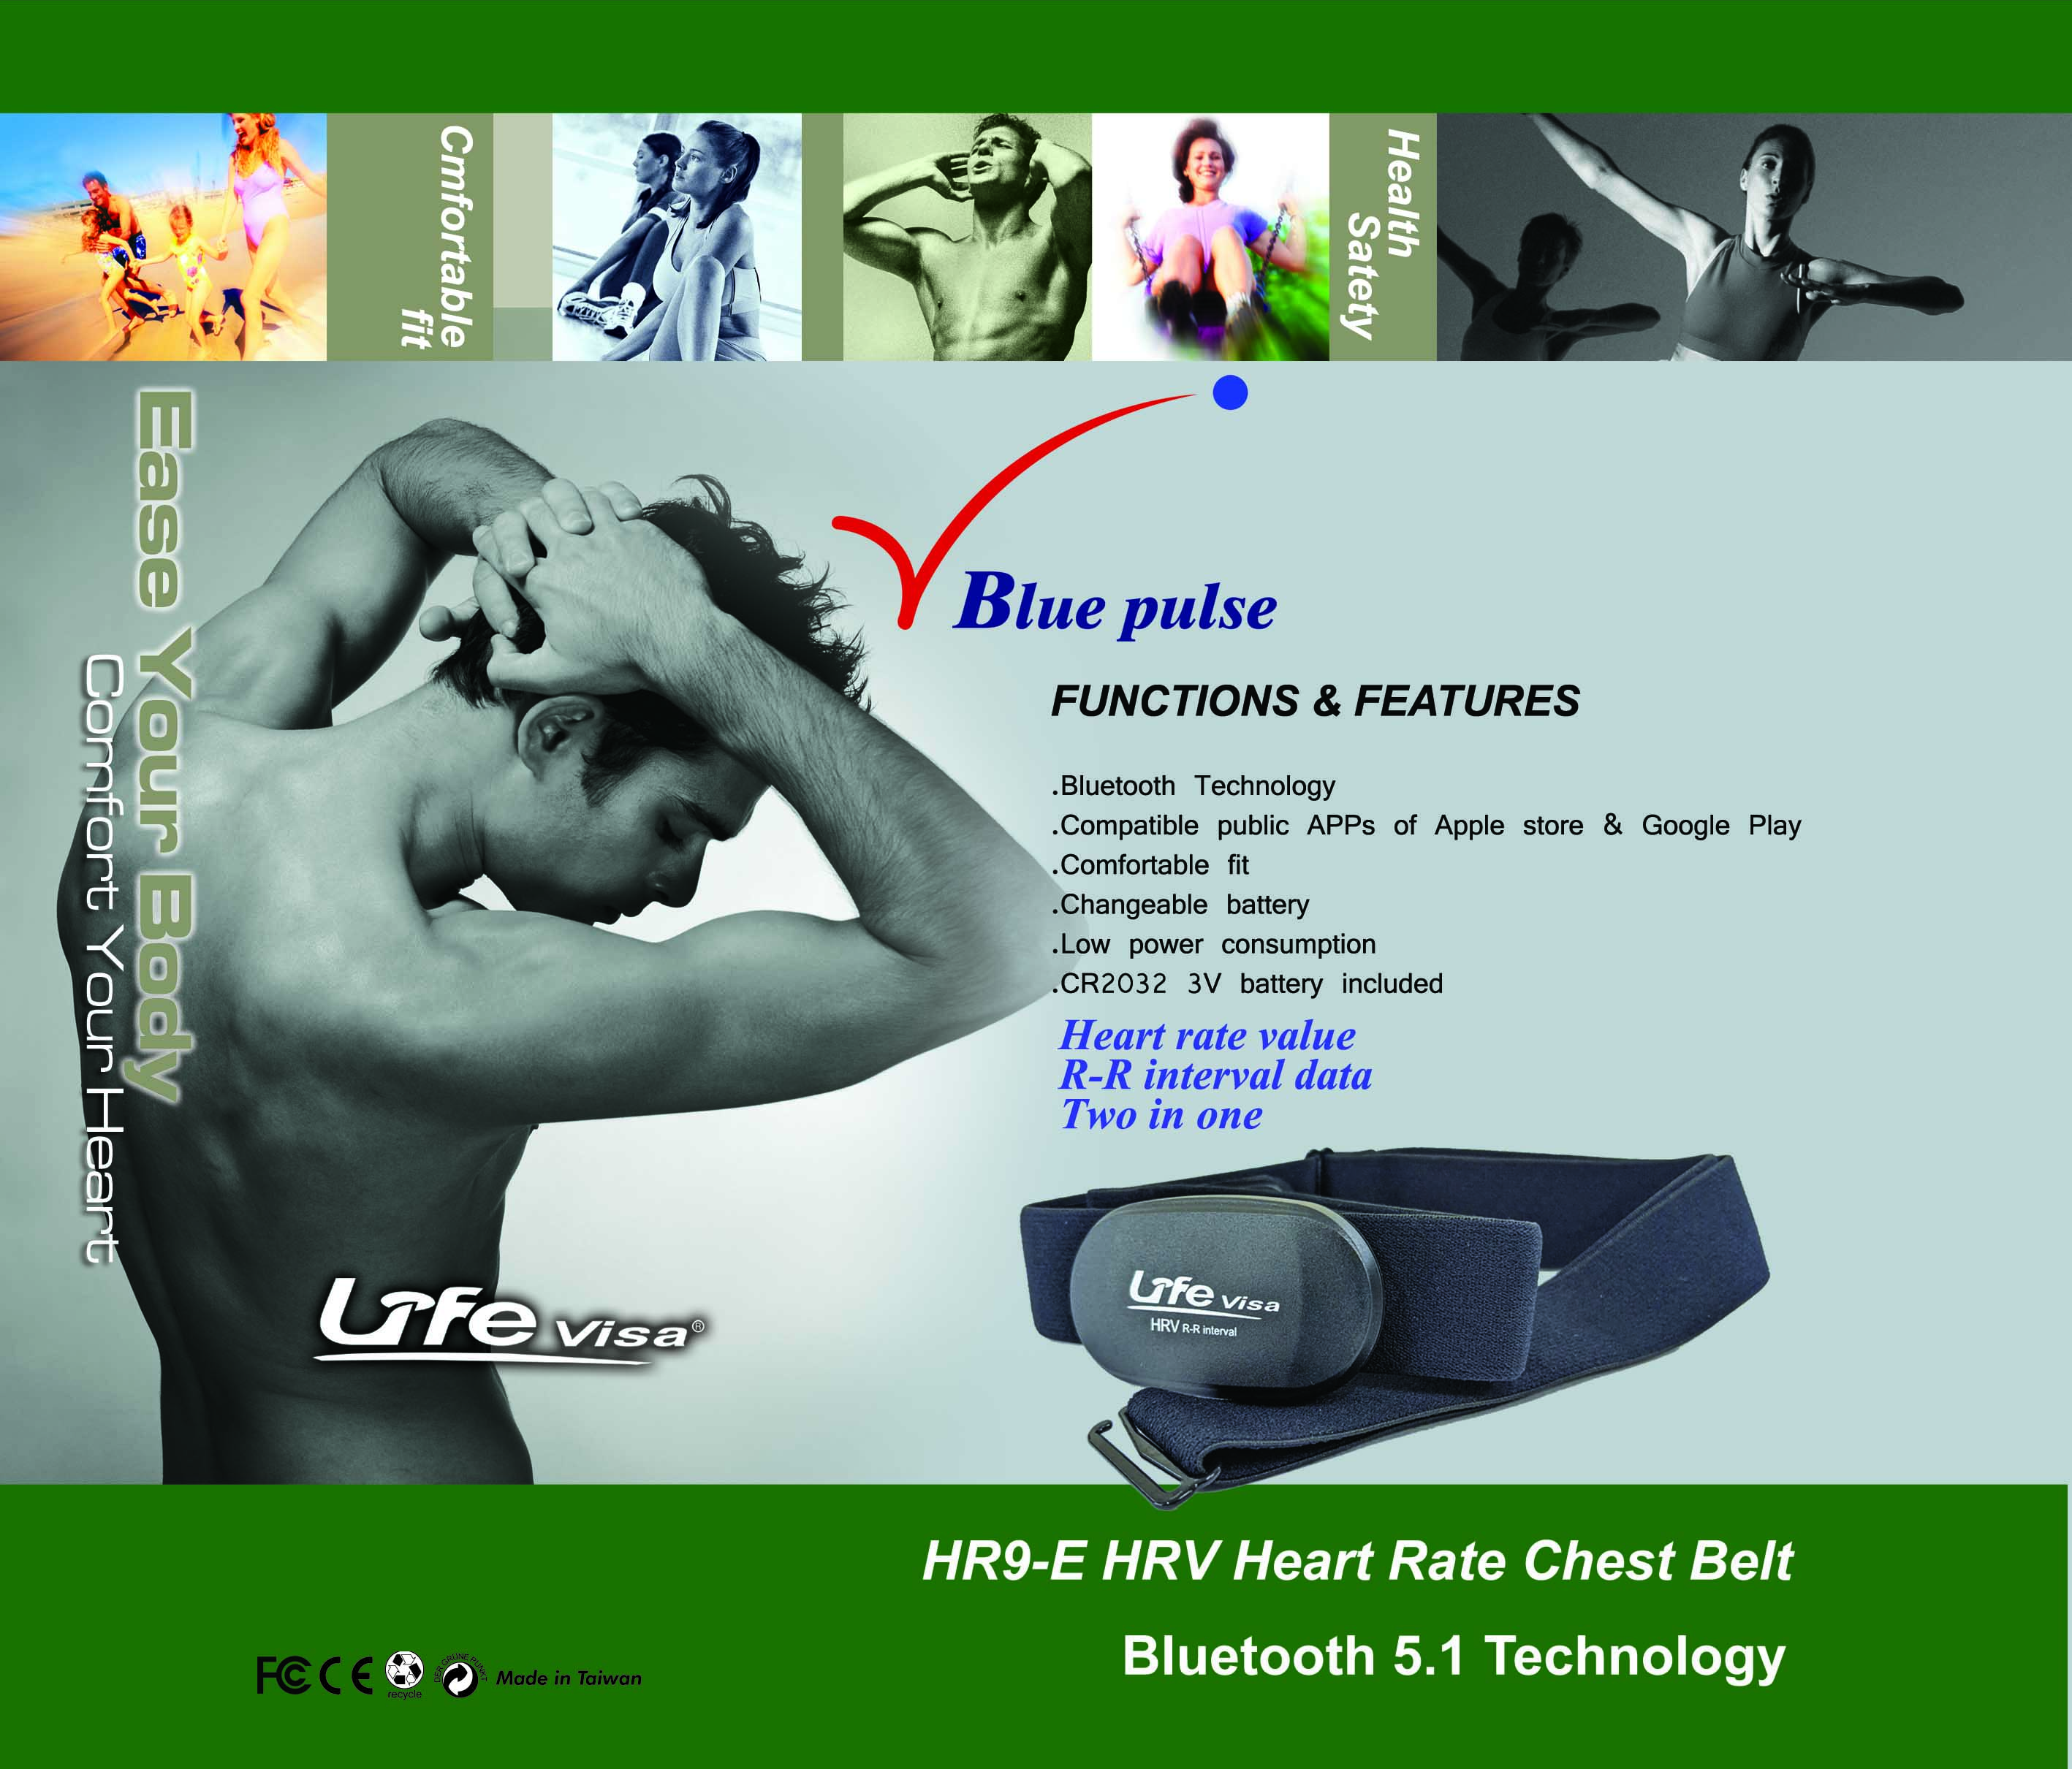 Bluetooth heart rate monitor,Biotronic pulse heart rate monitor,Bluetooth heart rate monitor,One-piece elastic heart rate chest strap design,g.pulse heart rate monitor,G.PULSE 3 in 1,3 in 1 heart rate,three mode heart rate monitor,Lifevisa,lifevisa,Taiwan Biotronic